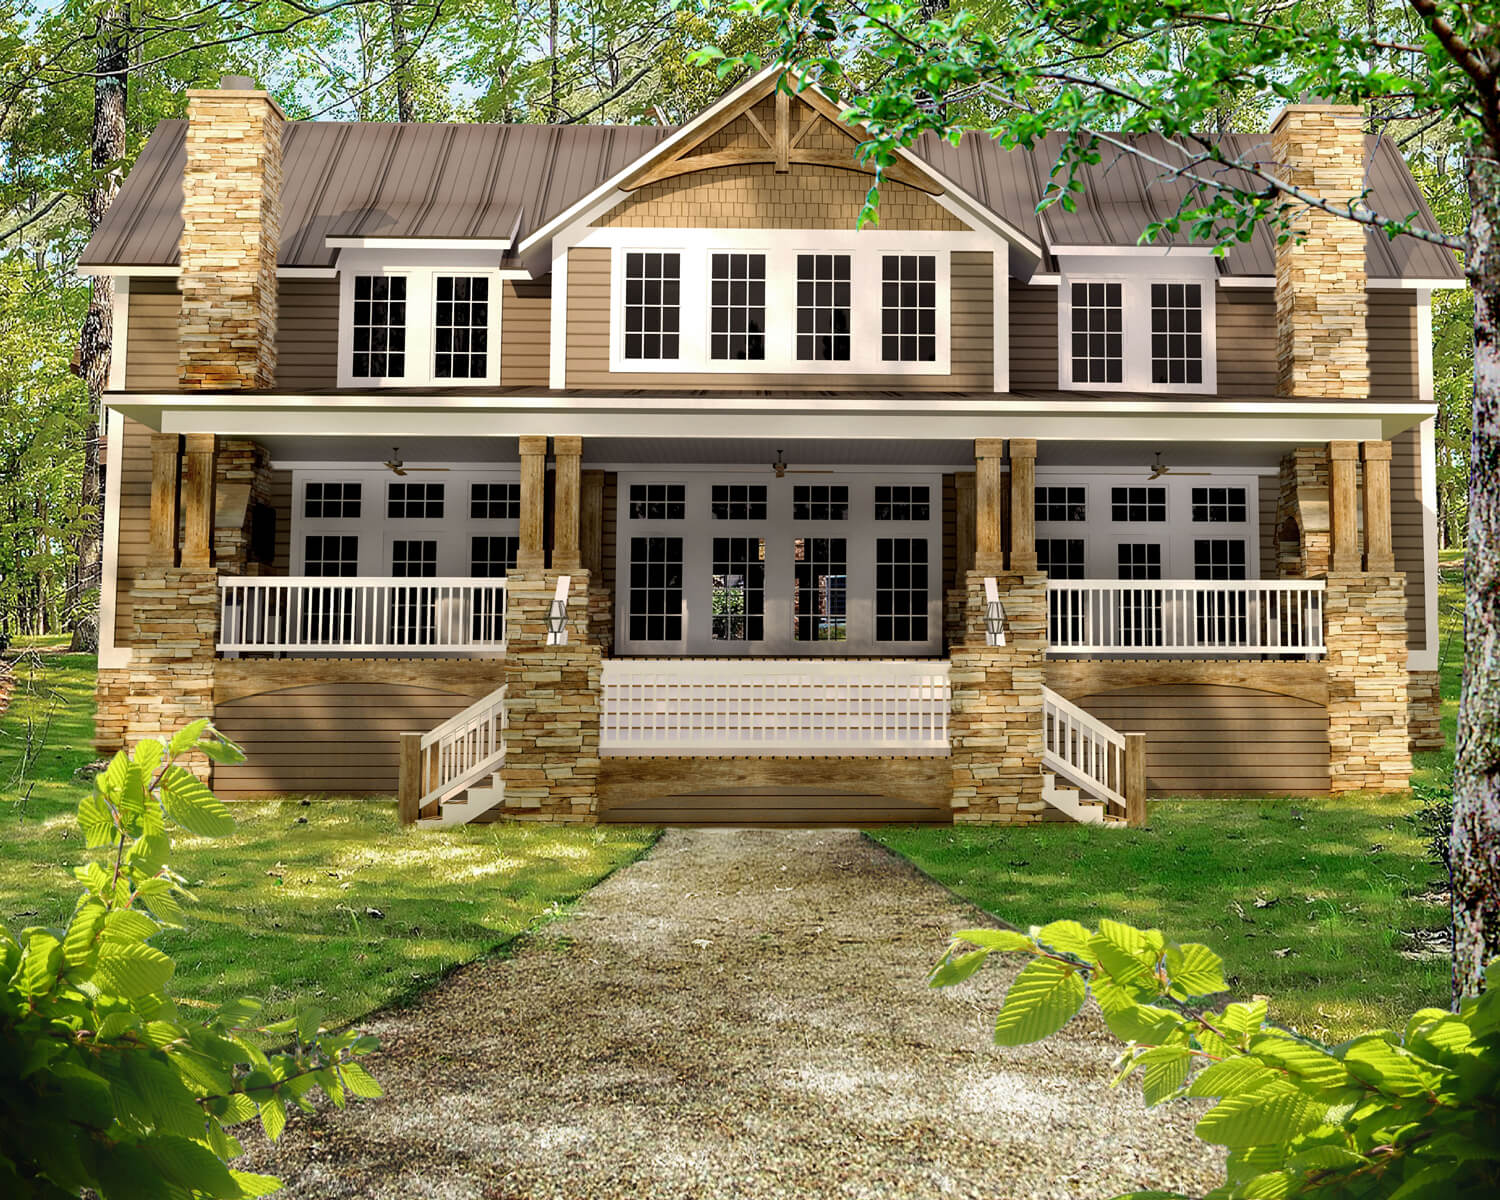 Designed by Foshee Architecture – Lake House 1 Front Elevation